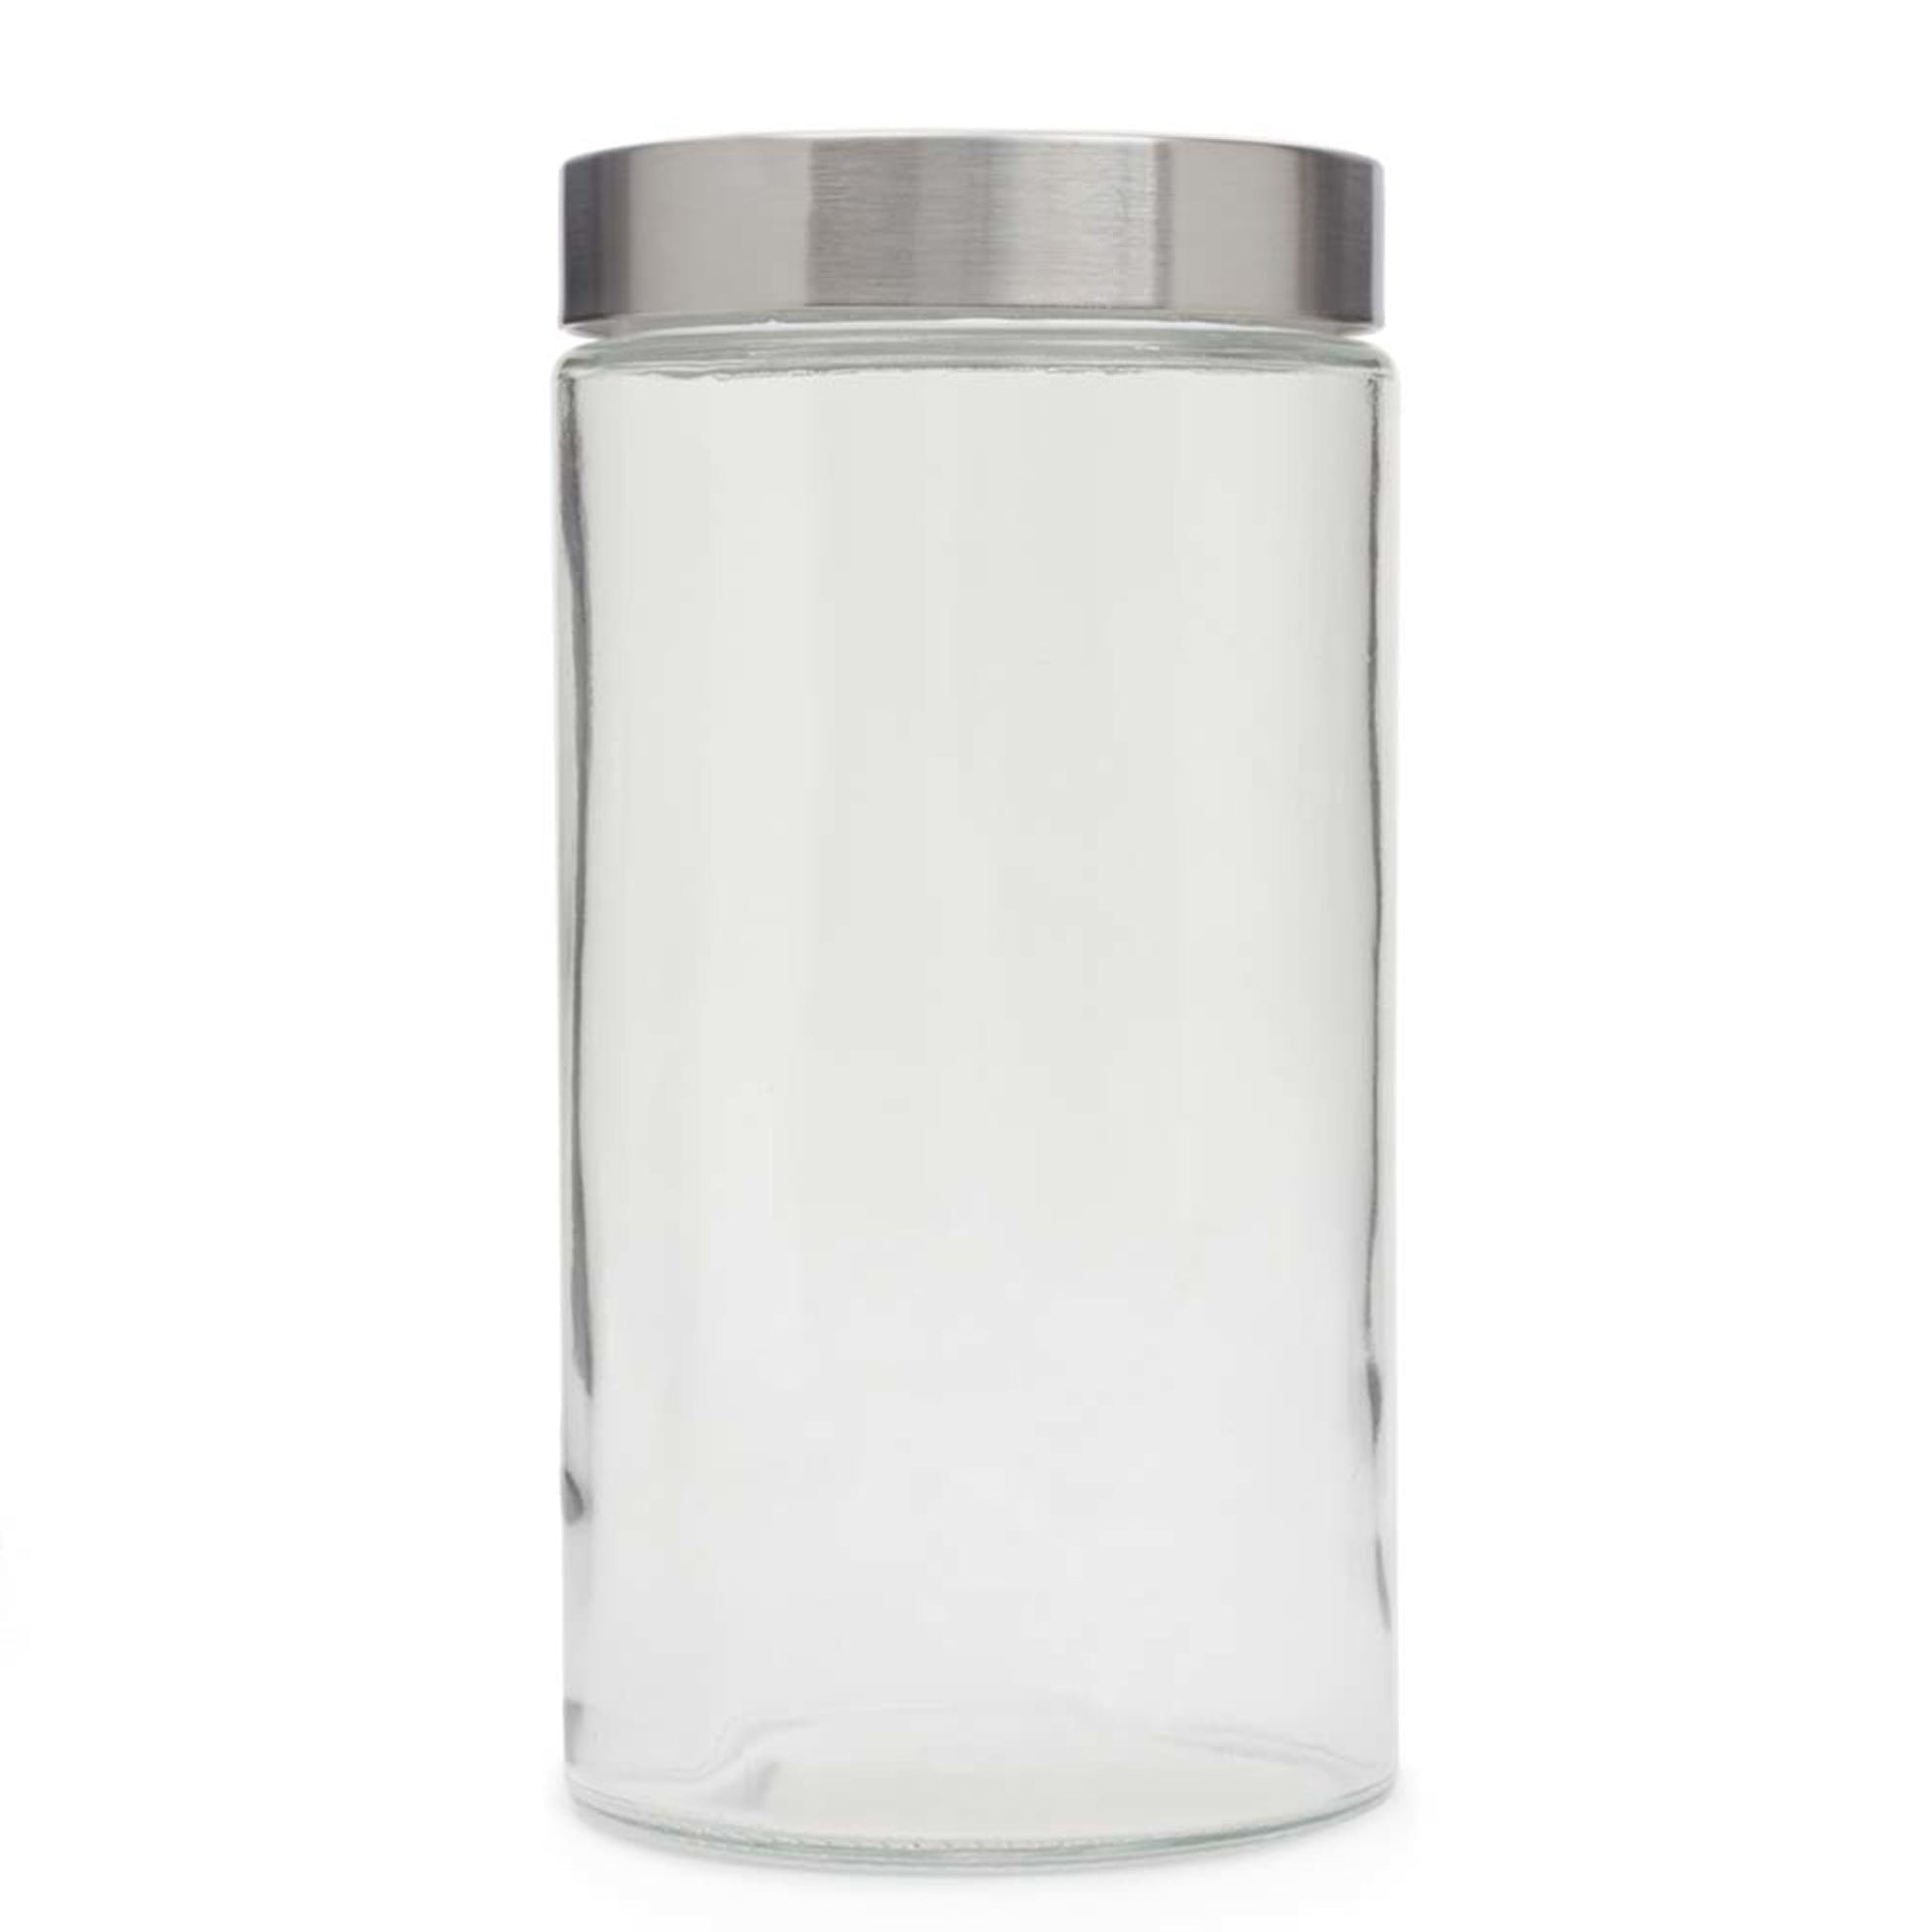 Home Basics 67 oz. X-Large Round Glass Canister With Stainless